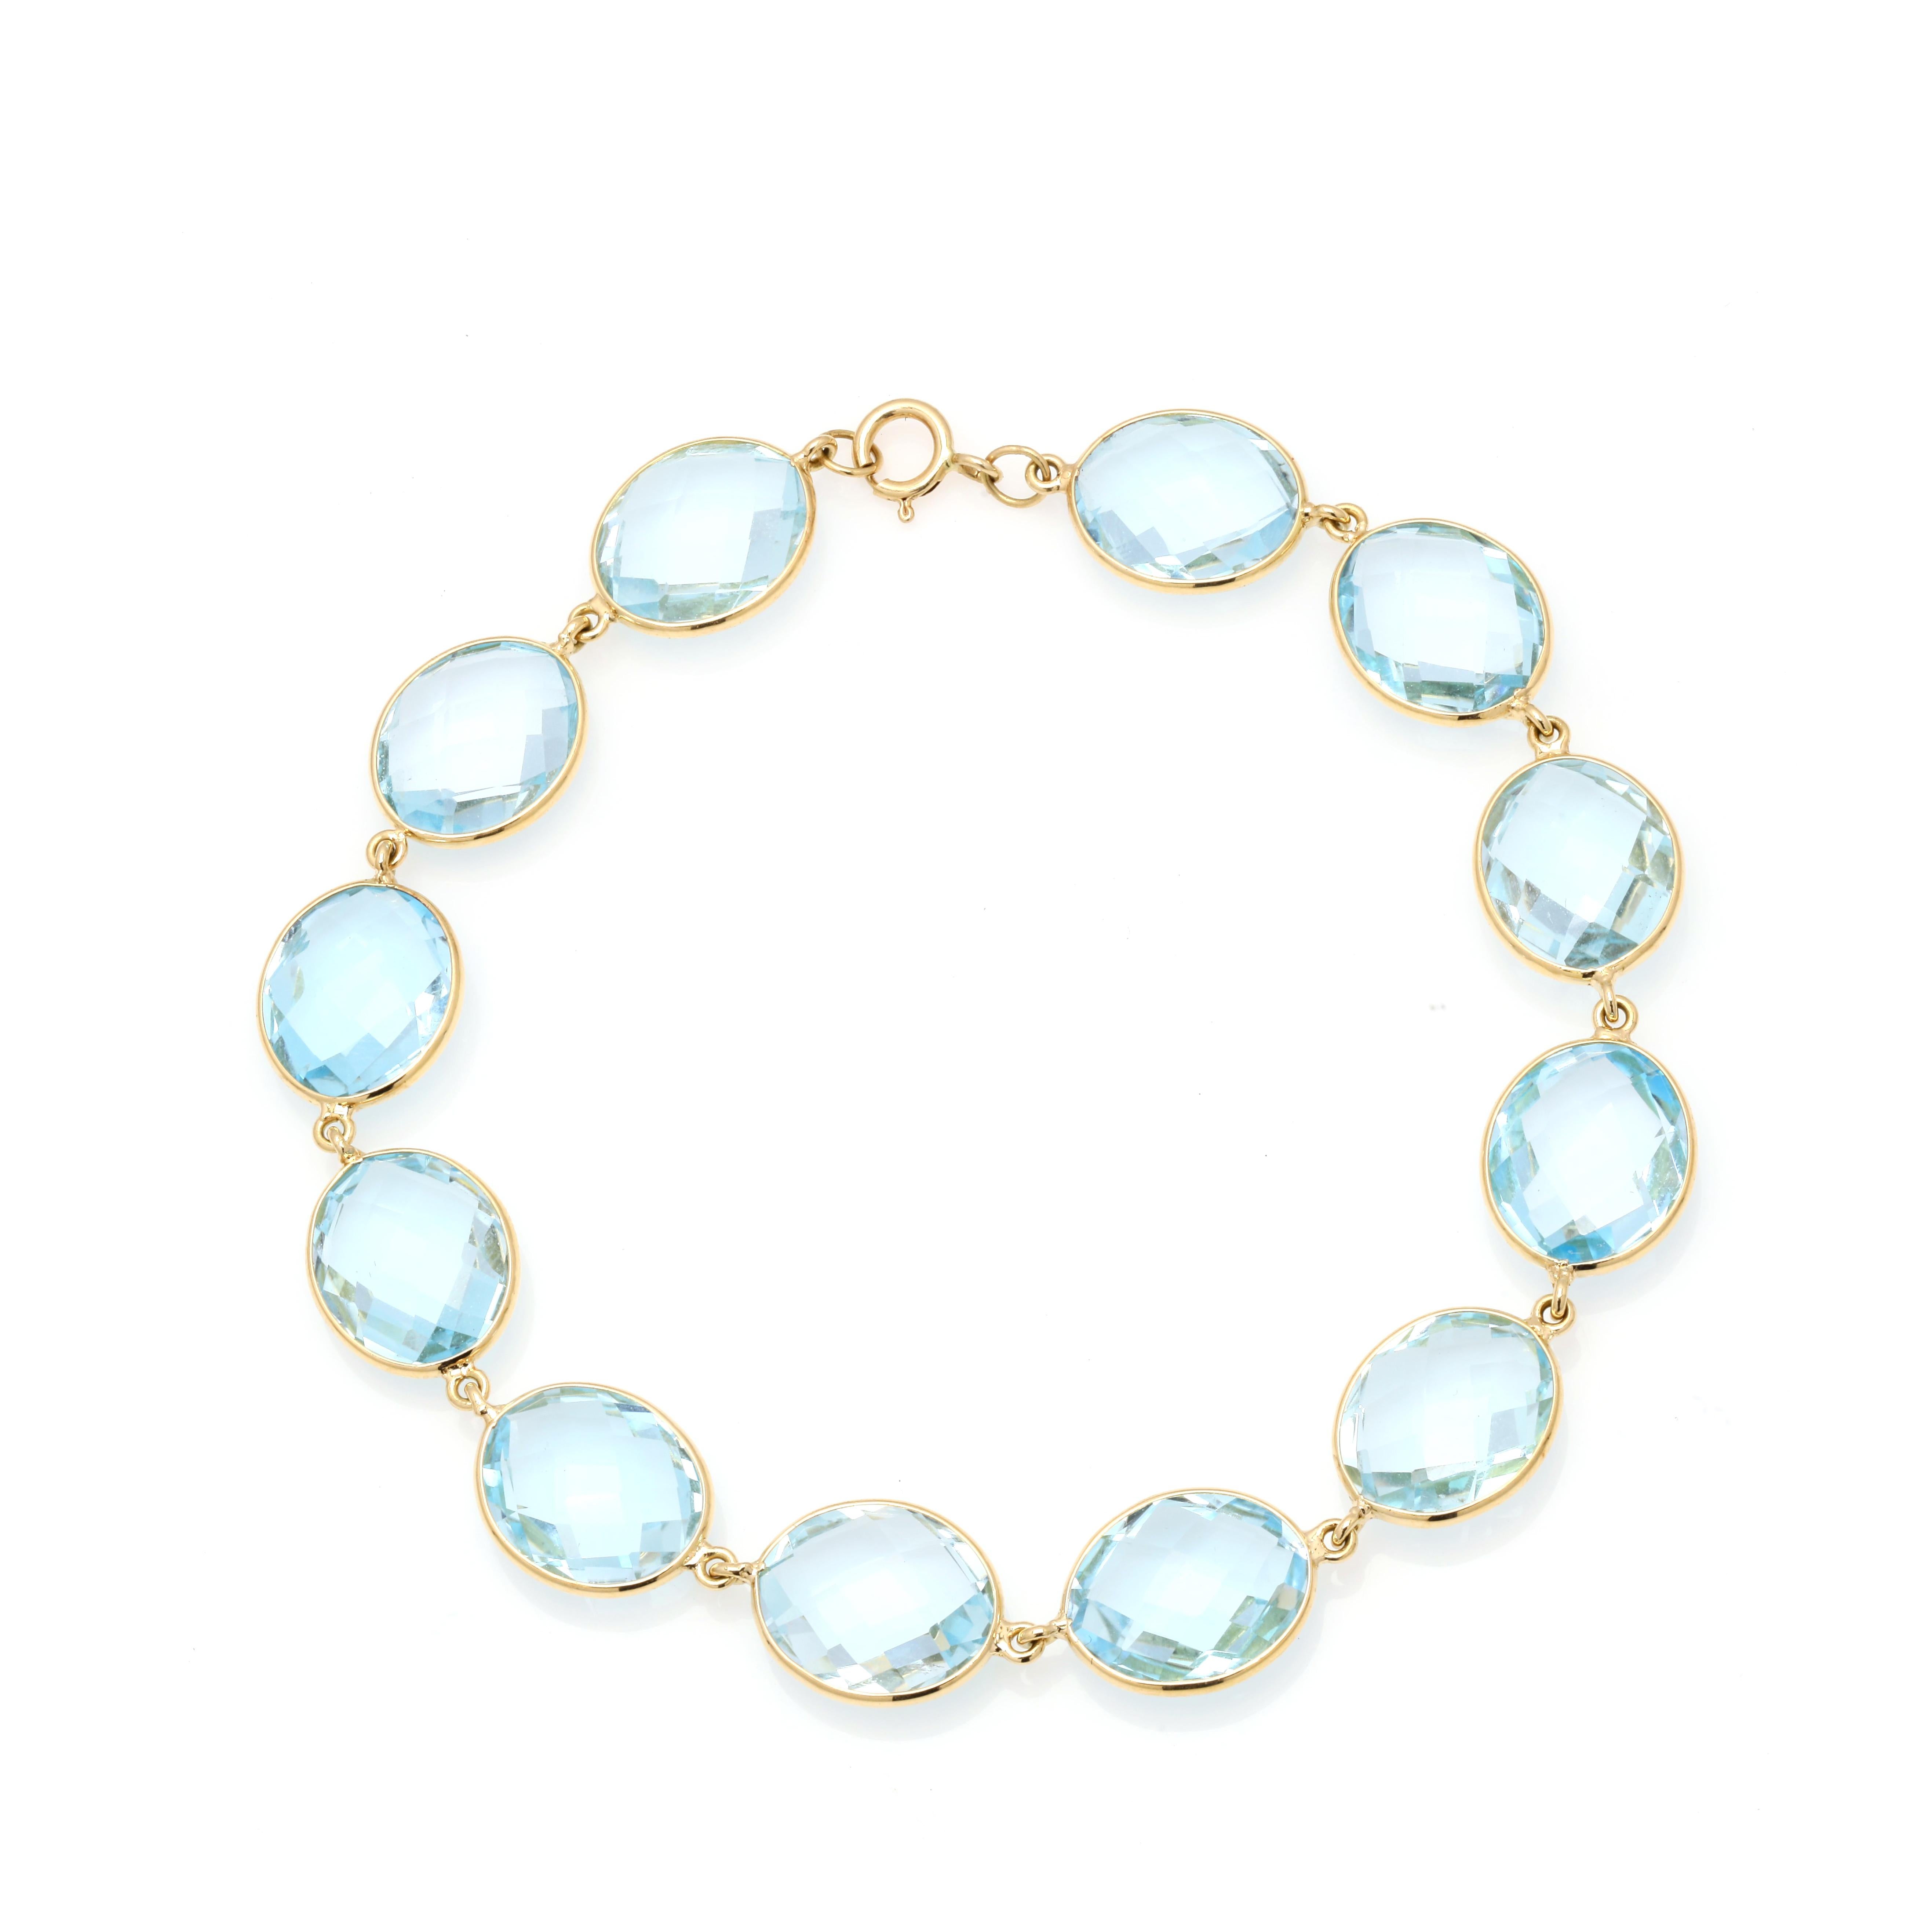 Oval Cut Translucent 41.7 ct Oval Blue Topaz Chain Bracelet in Solid 18K Yellow Gold For Sale